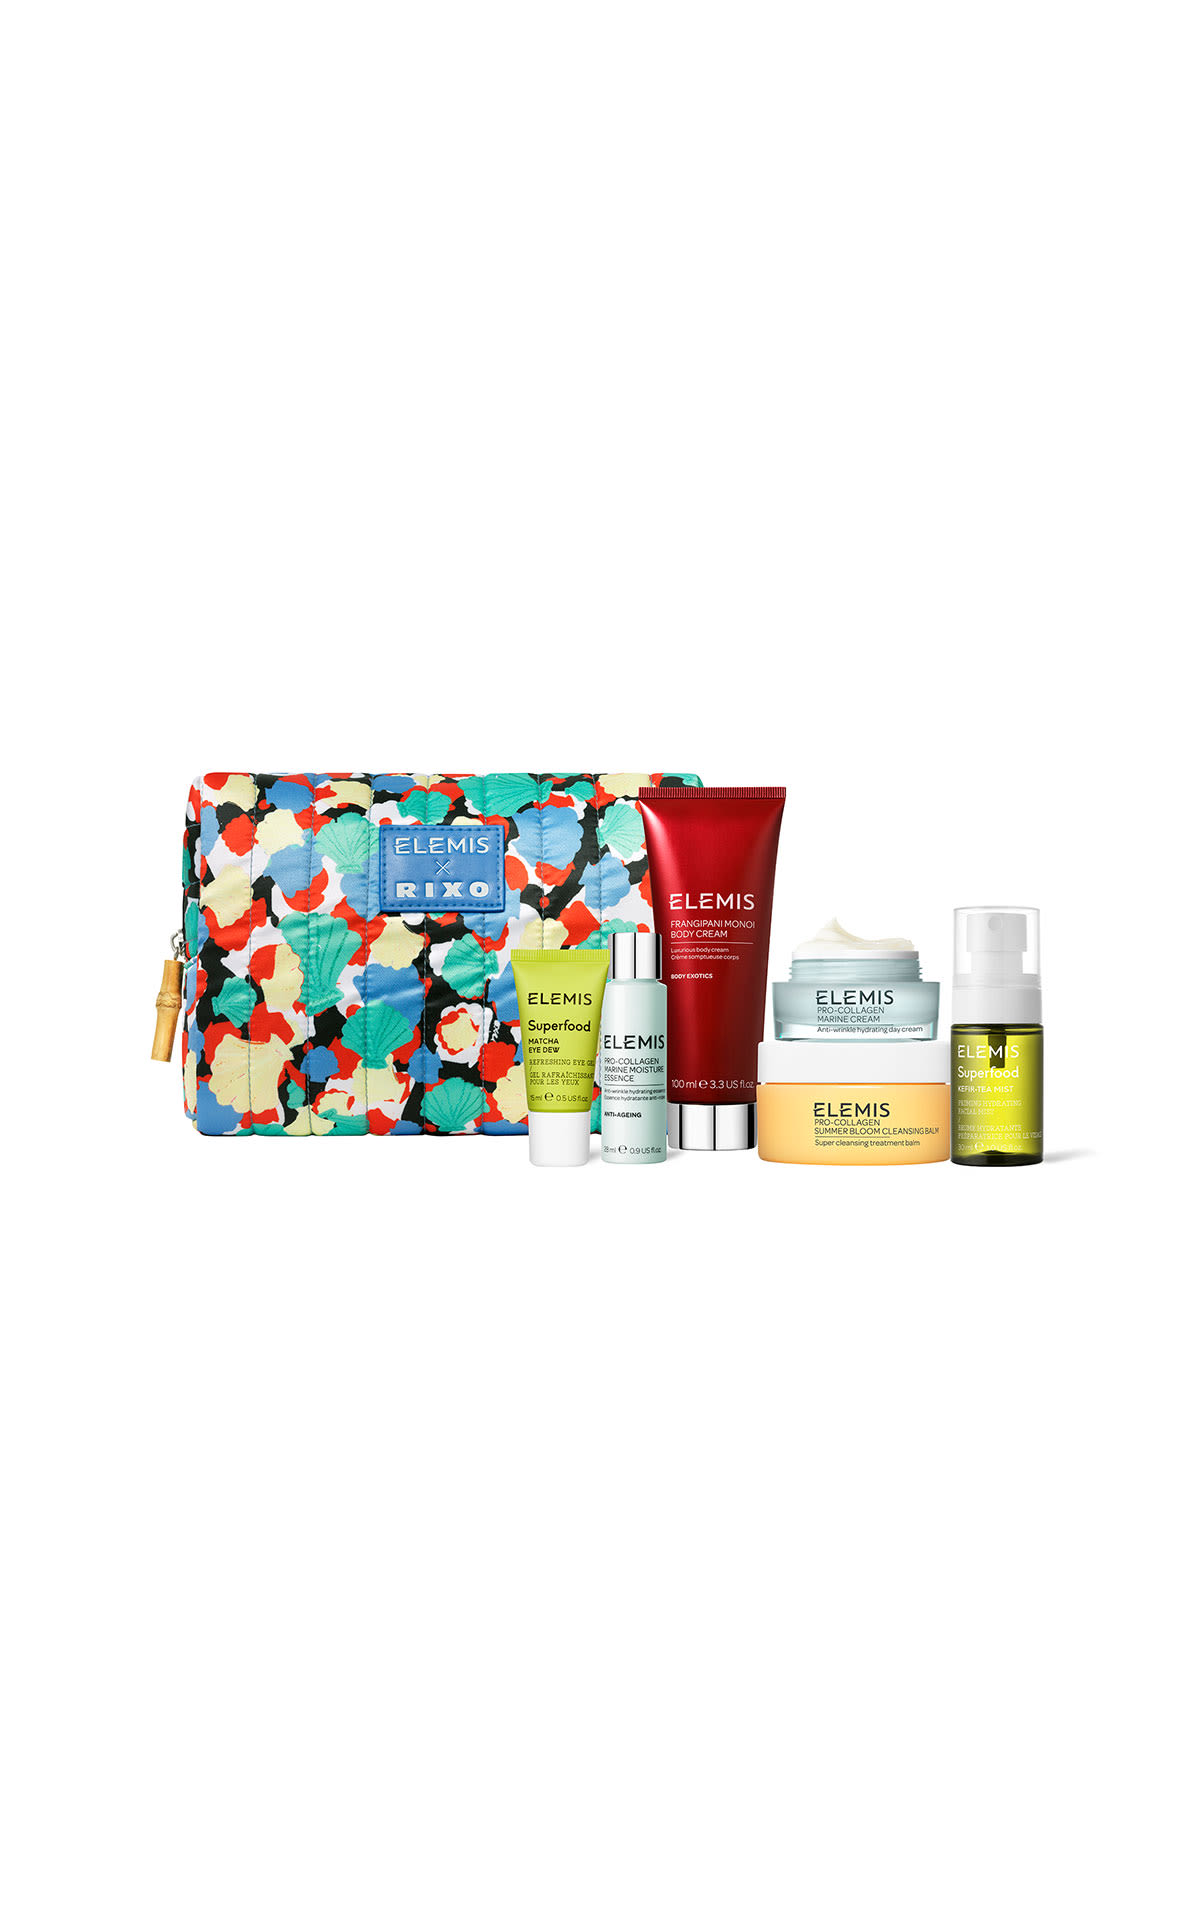 Elemis Rixo summer collection from Bicester Village